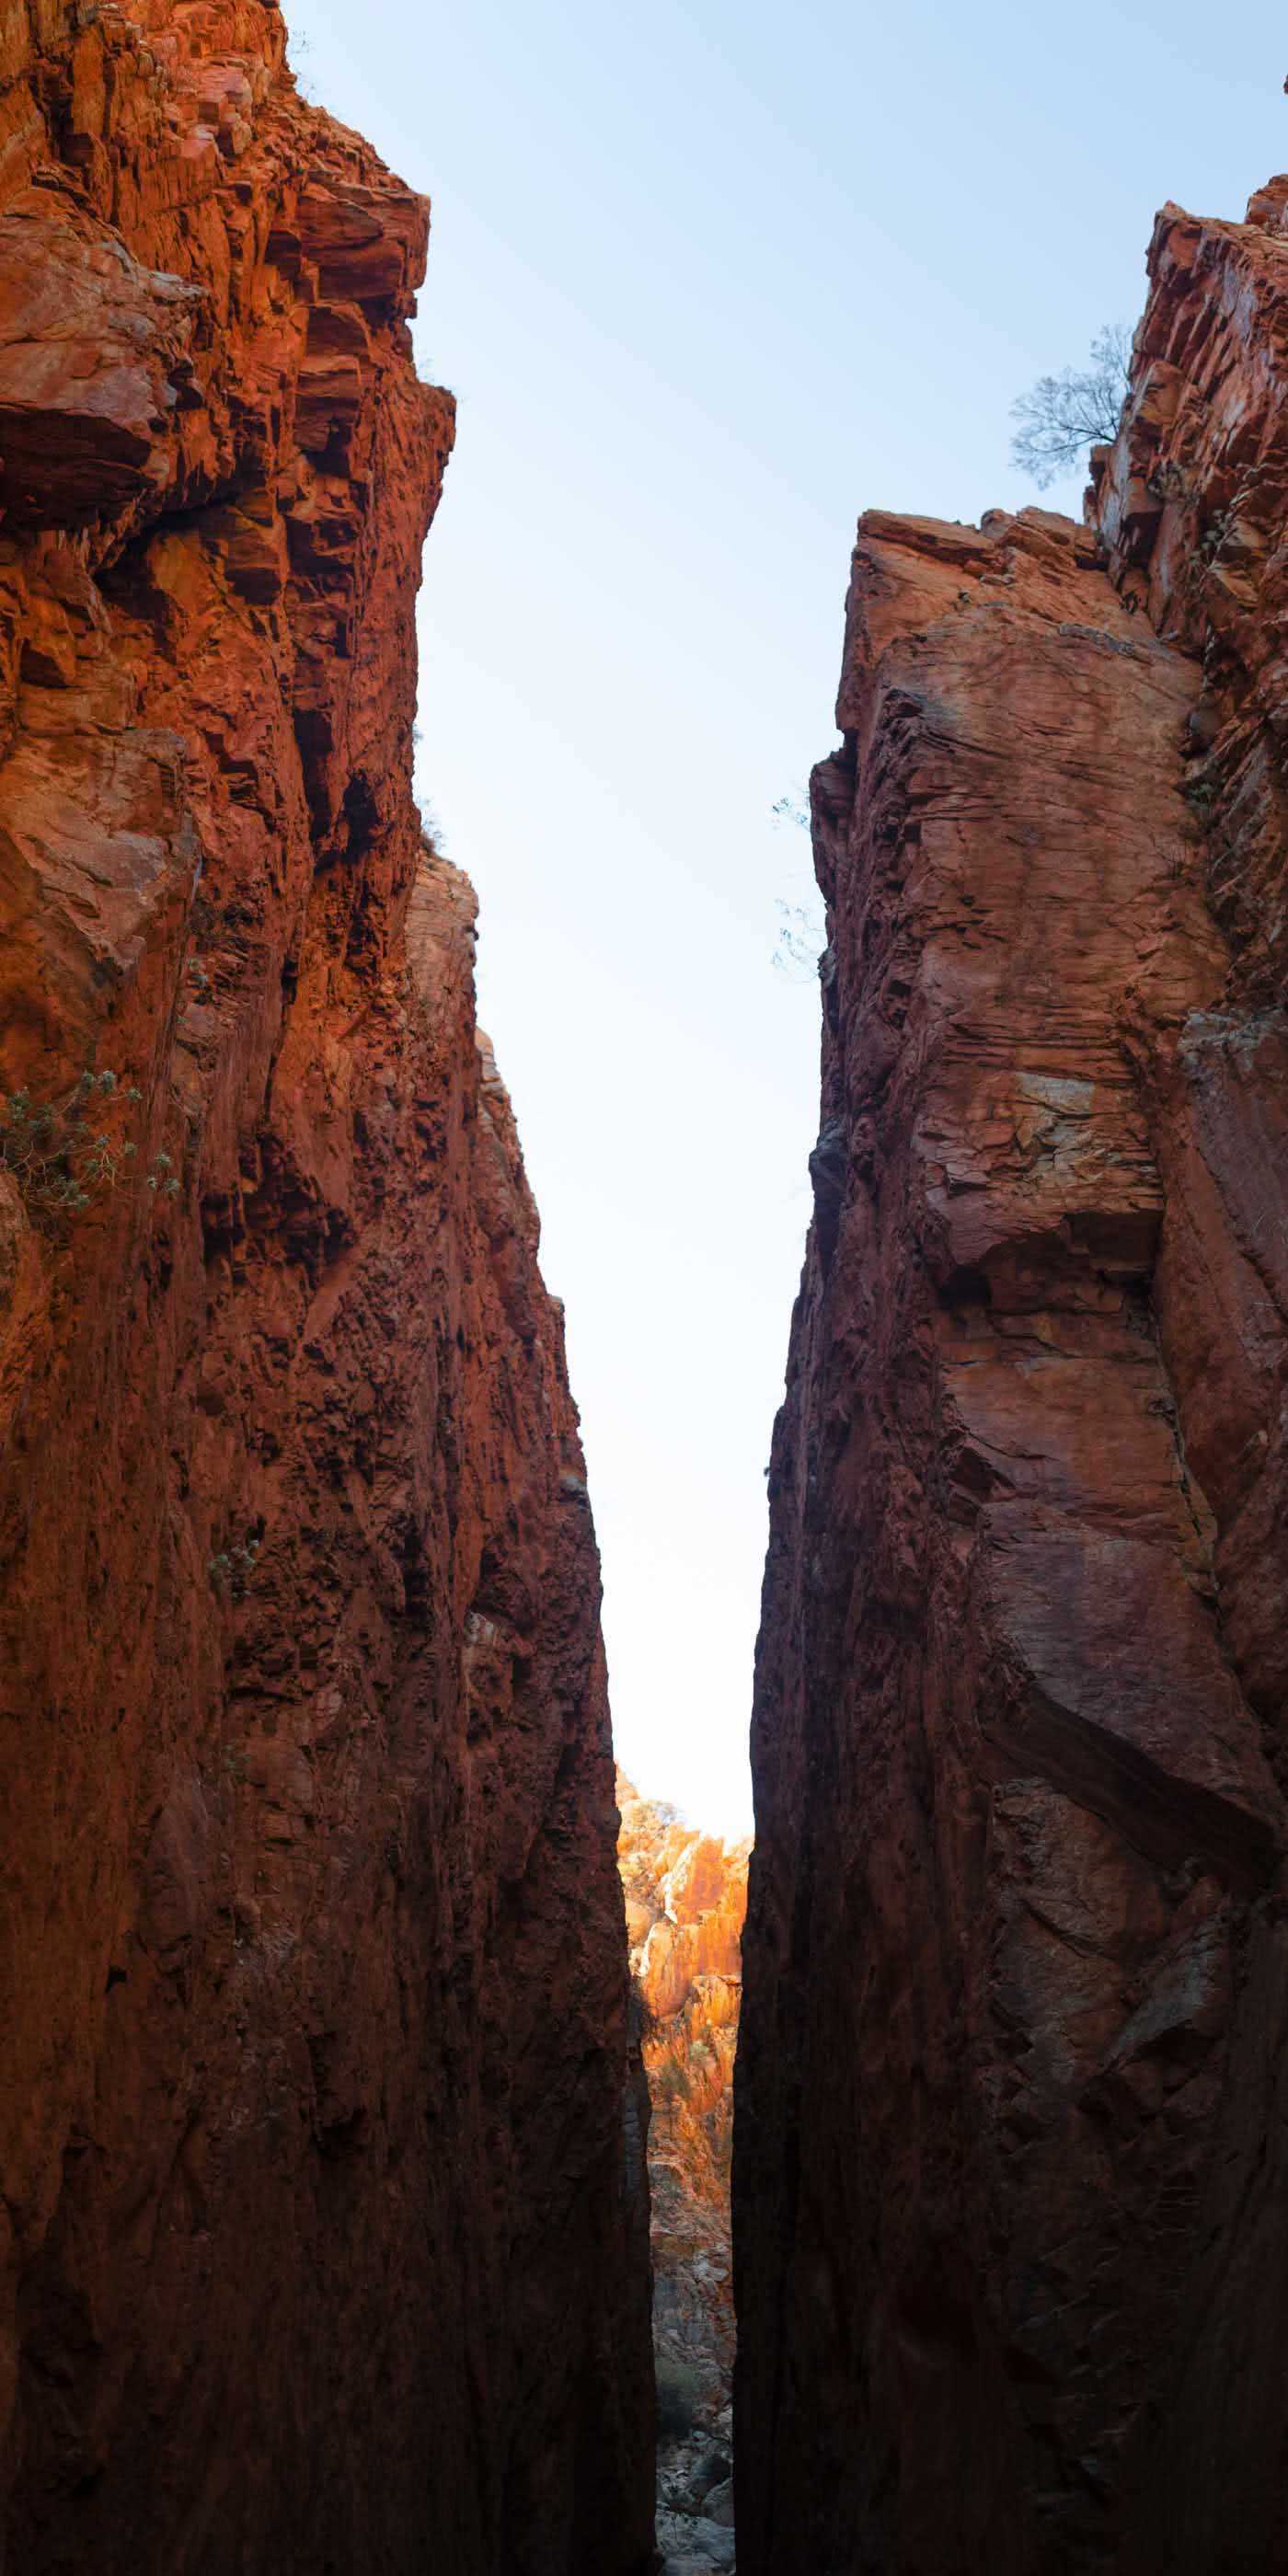 Capturing The Landscapes Of The Larapinta, Conor Moore, photo 11, Standley Chasm, Panorama, cliffs, sky, red rock, sunlight